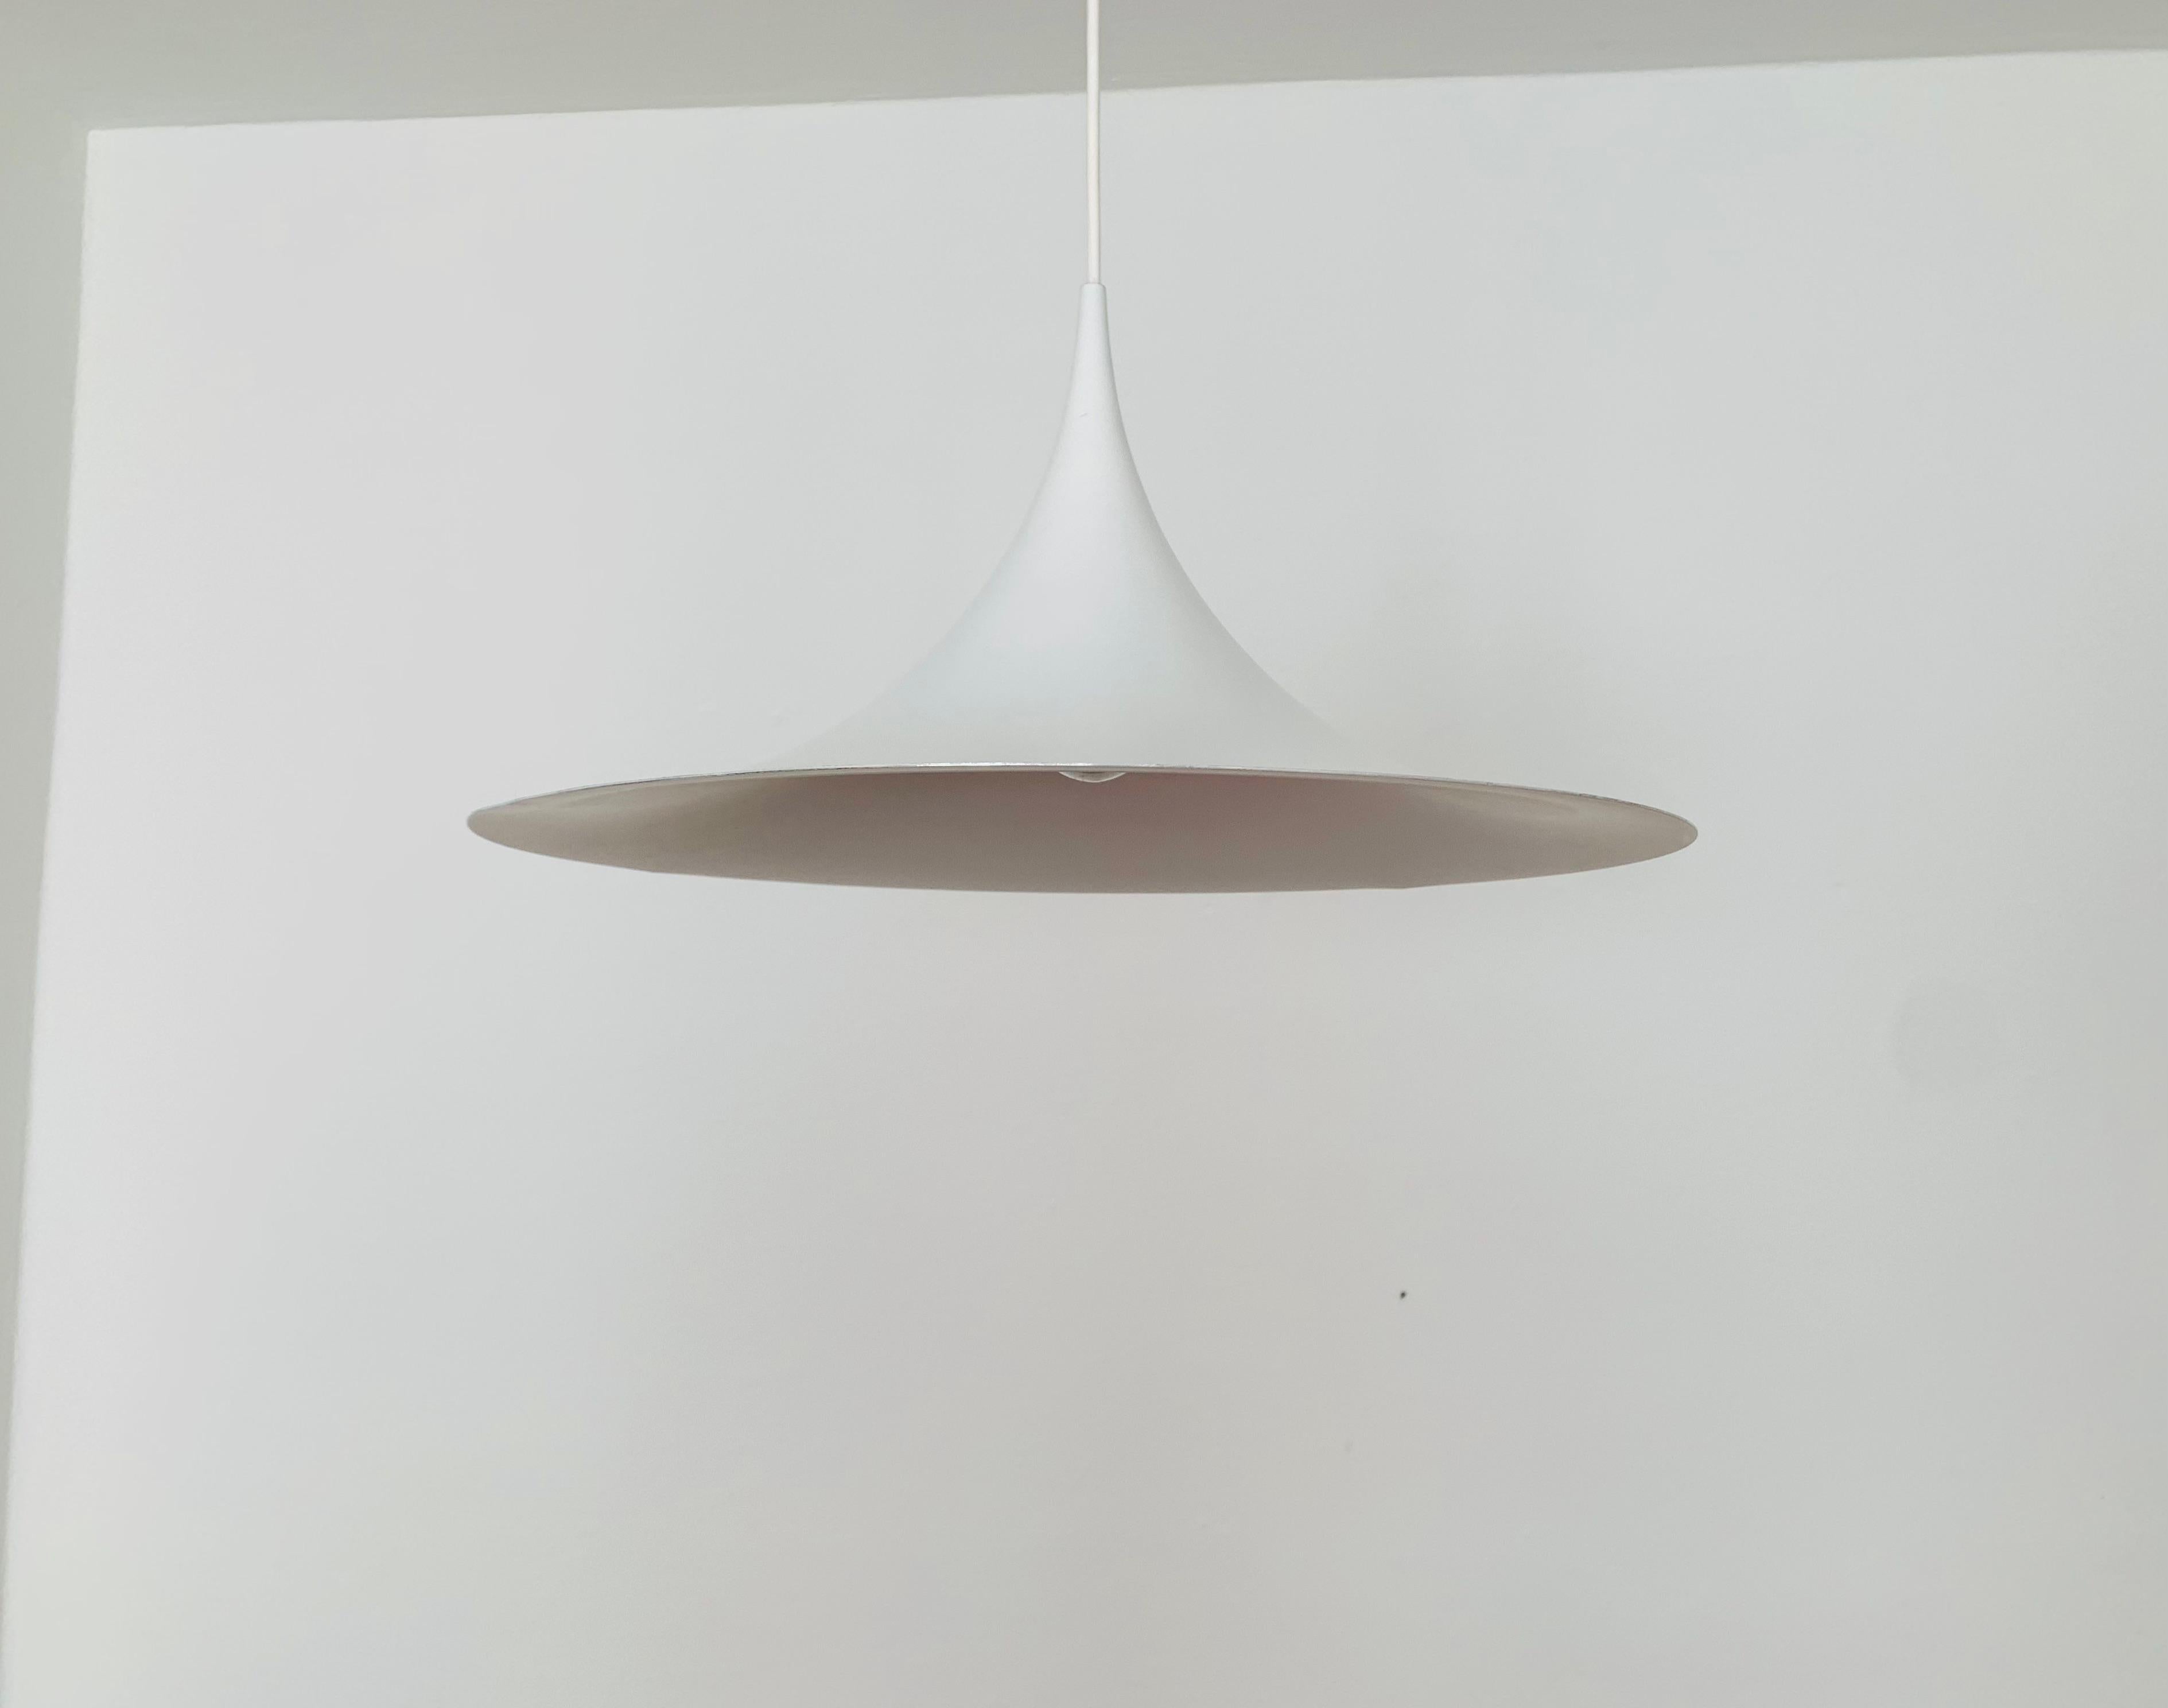 Very nice Danish pendant lamp from the 1960s.
The design and the appearance of the lamp is particularly beautiful.
The shape creates a warm and pleasant light.
An absolute design classic and an enrichment for every home.

Condition:

Very